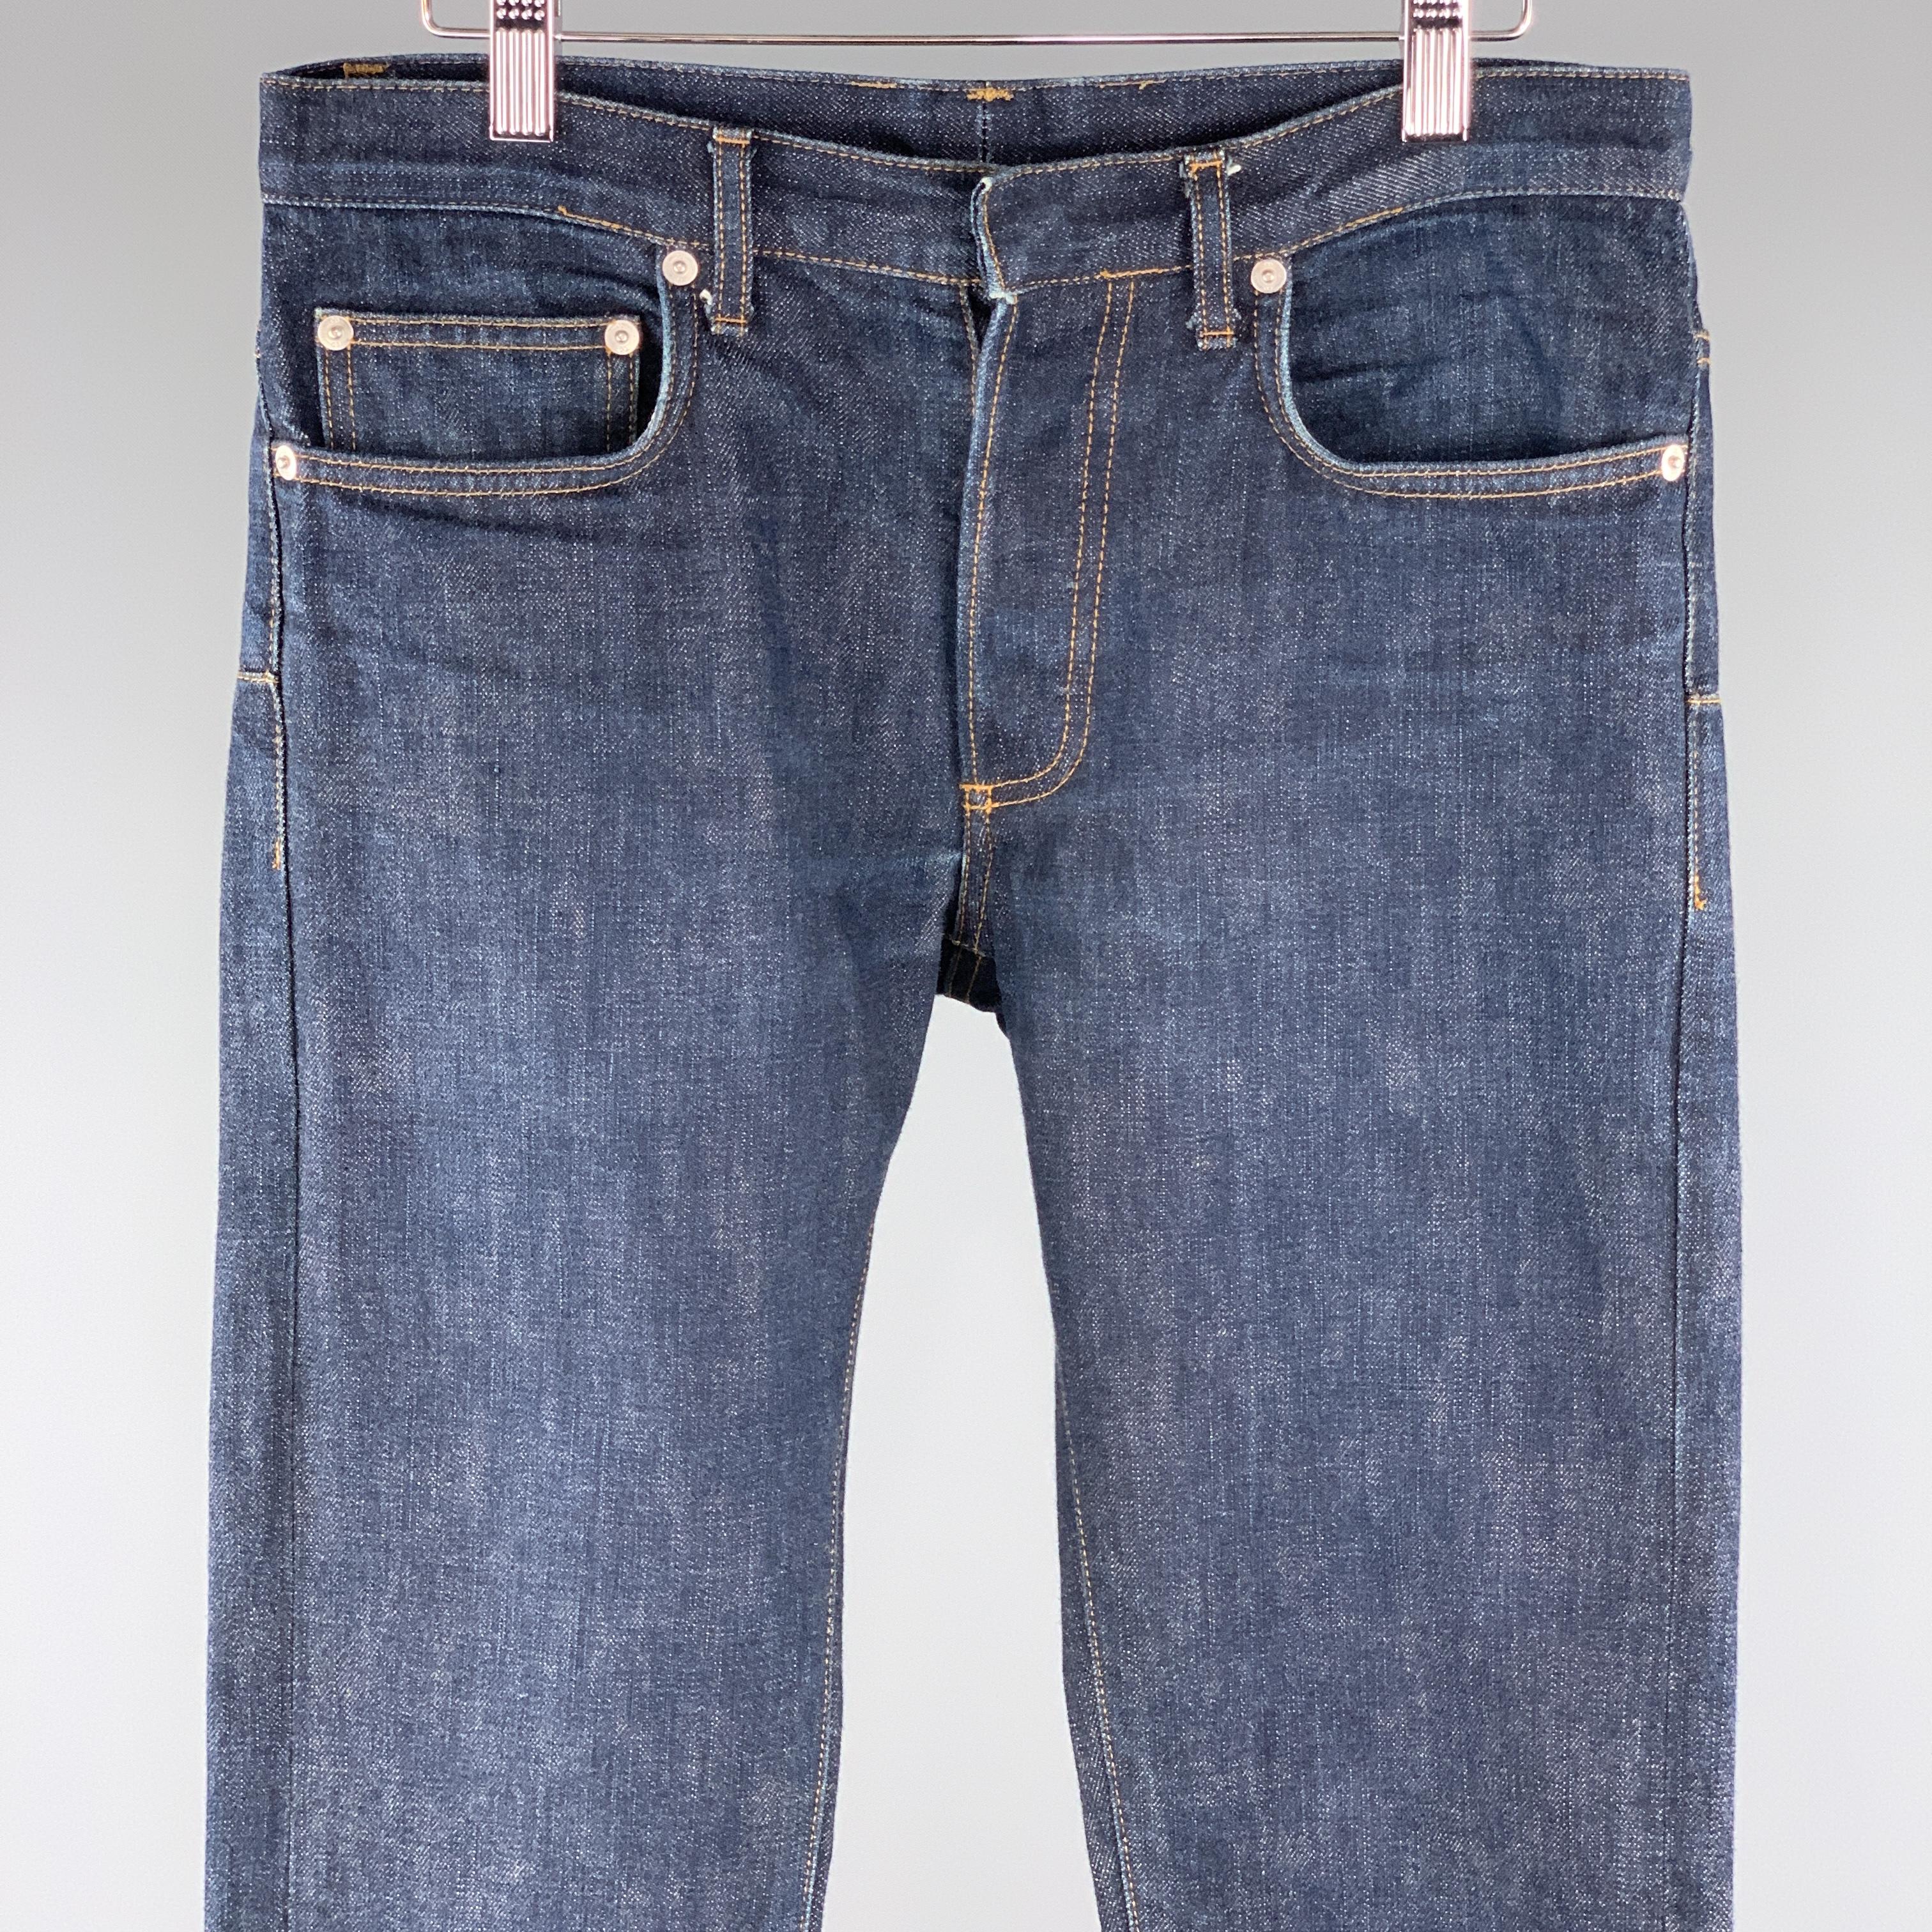 DIOR HOMME jeans comes in a indigo wash denim featuring a skinny fit style, contrast stitching, and a button fly closure. Made in Italy.
 
Very Good Pre-Owned Condition.
Marked: 31
 
Measurements:
 
Waist: 33 in.
Rise: 8 in.
Inseam: 29.5 in.